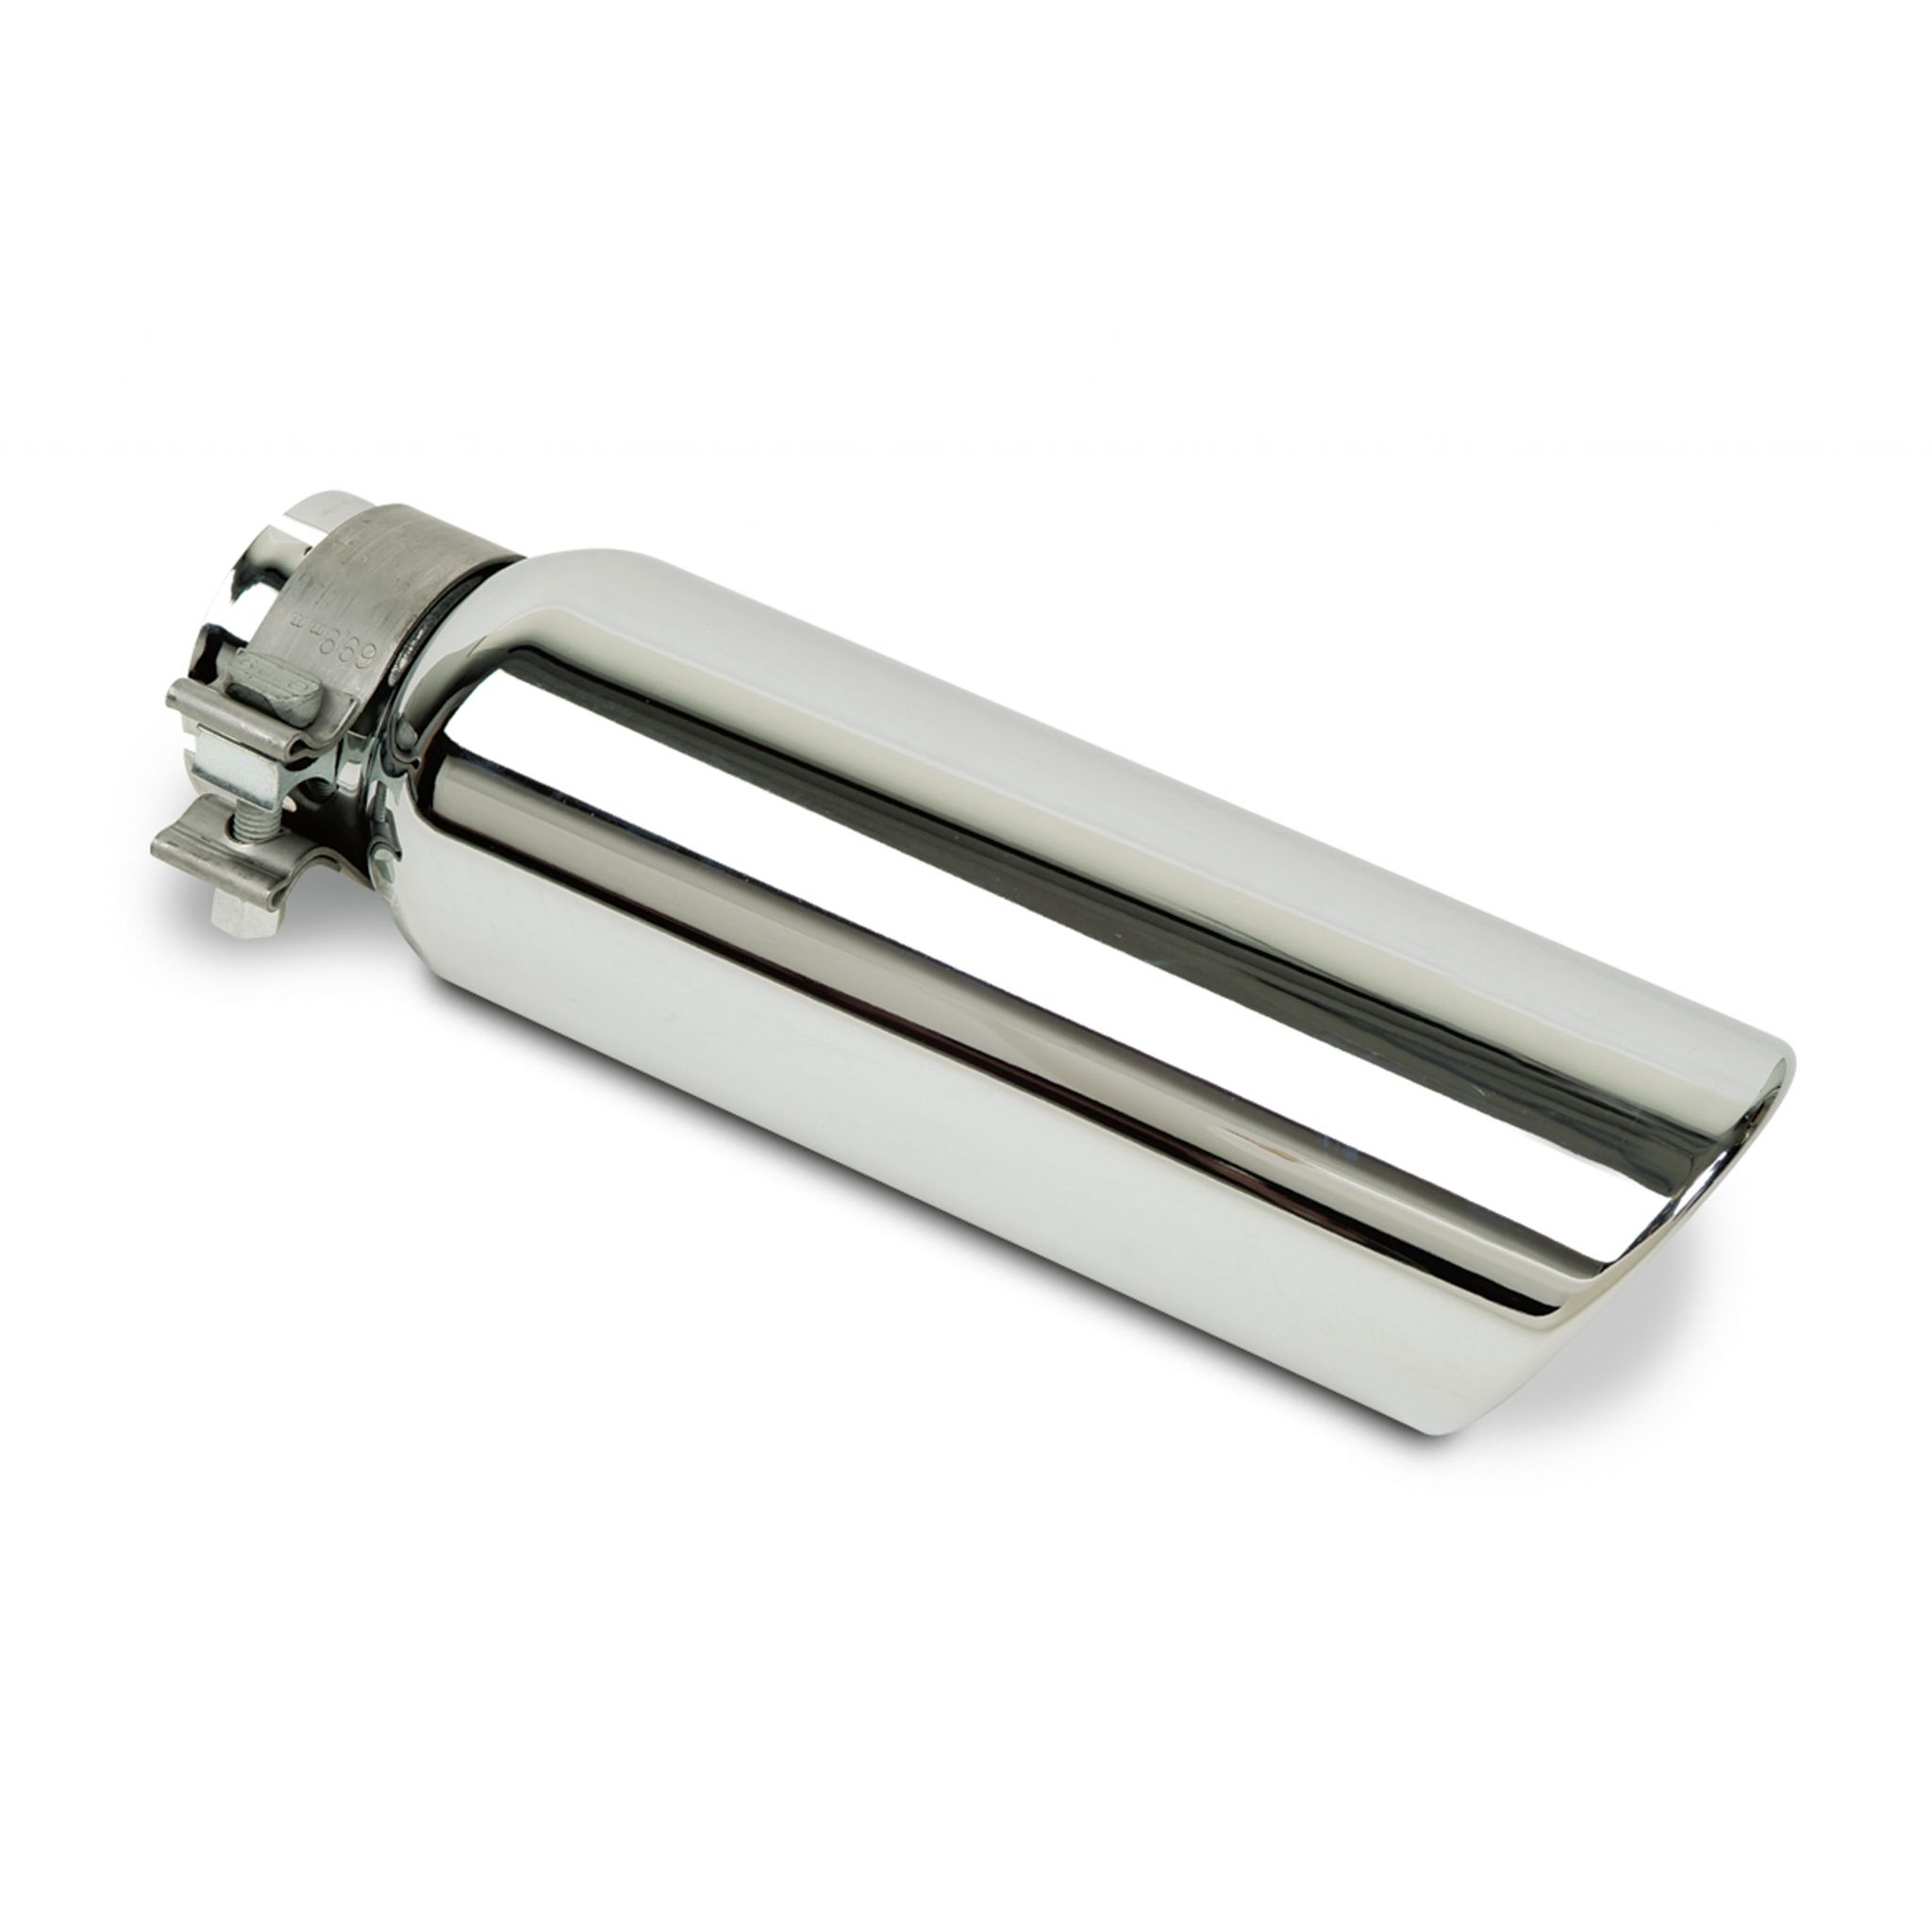 Go Rhino GRT234410 - Stainless Steel Exhaust Tip - Polished Stainless Steel